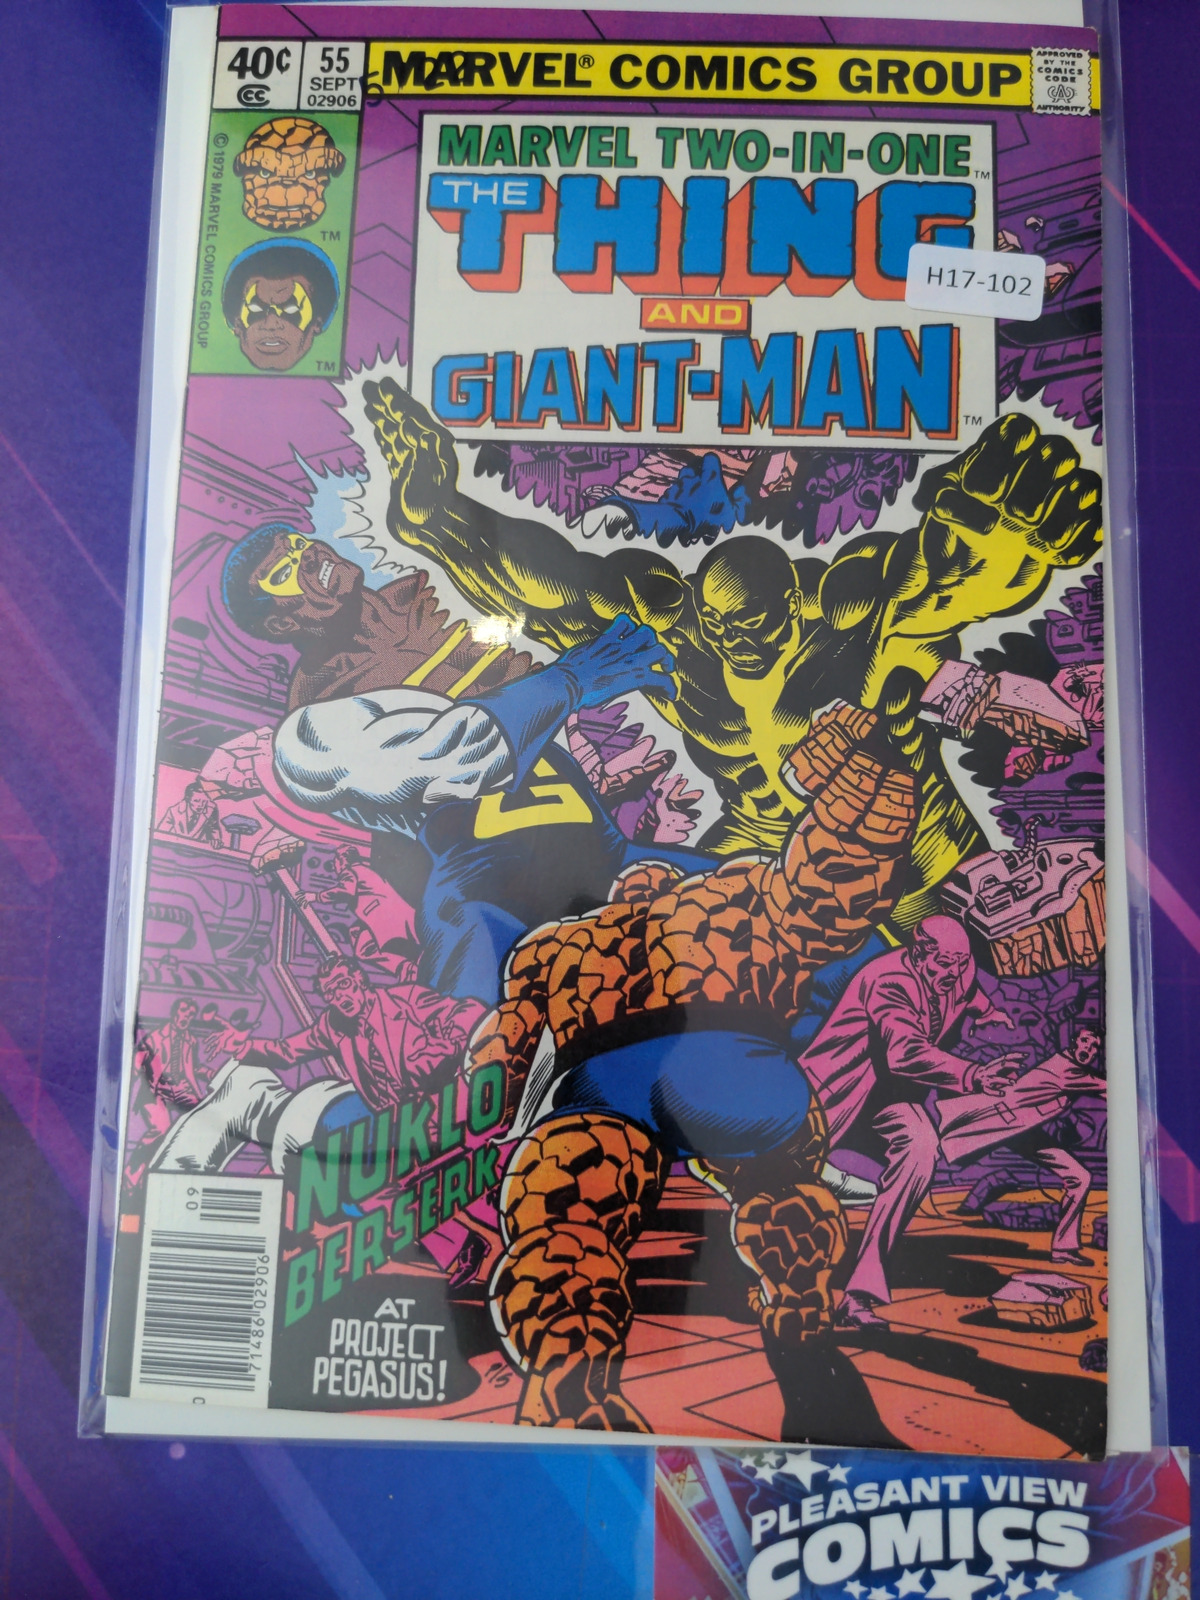 MARVEL TWO-IN-ONE #55 VOL. 1 HIGH GRADE (DATE STAMP) 1ST APP NEWSSTAND H17-102